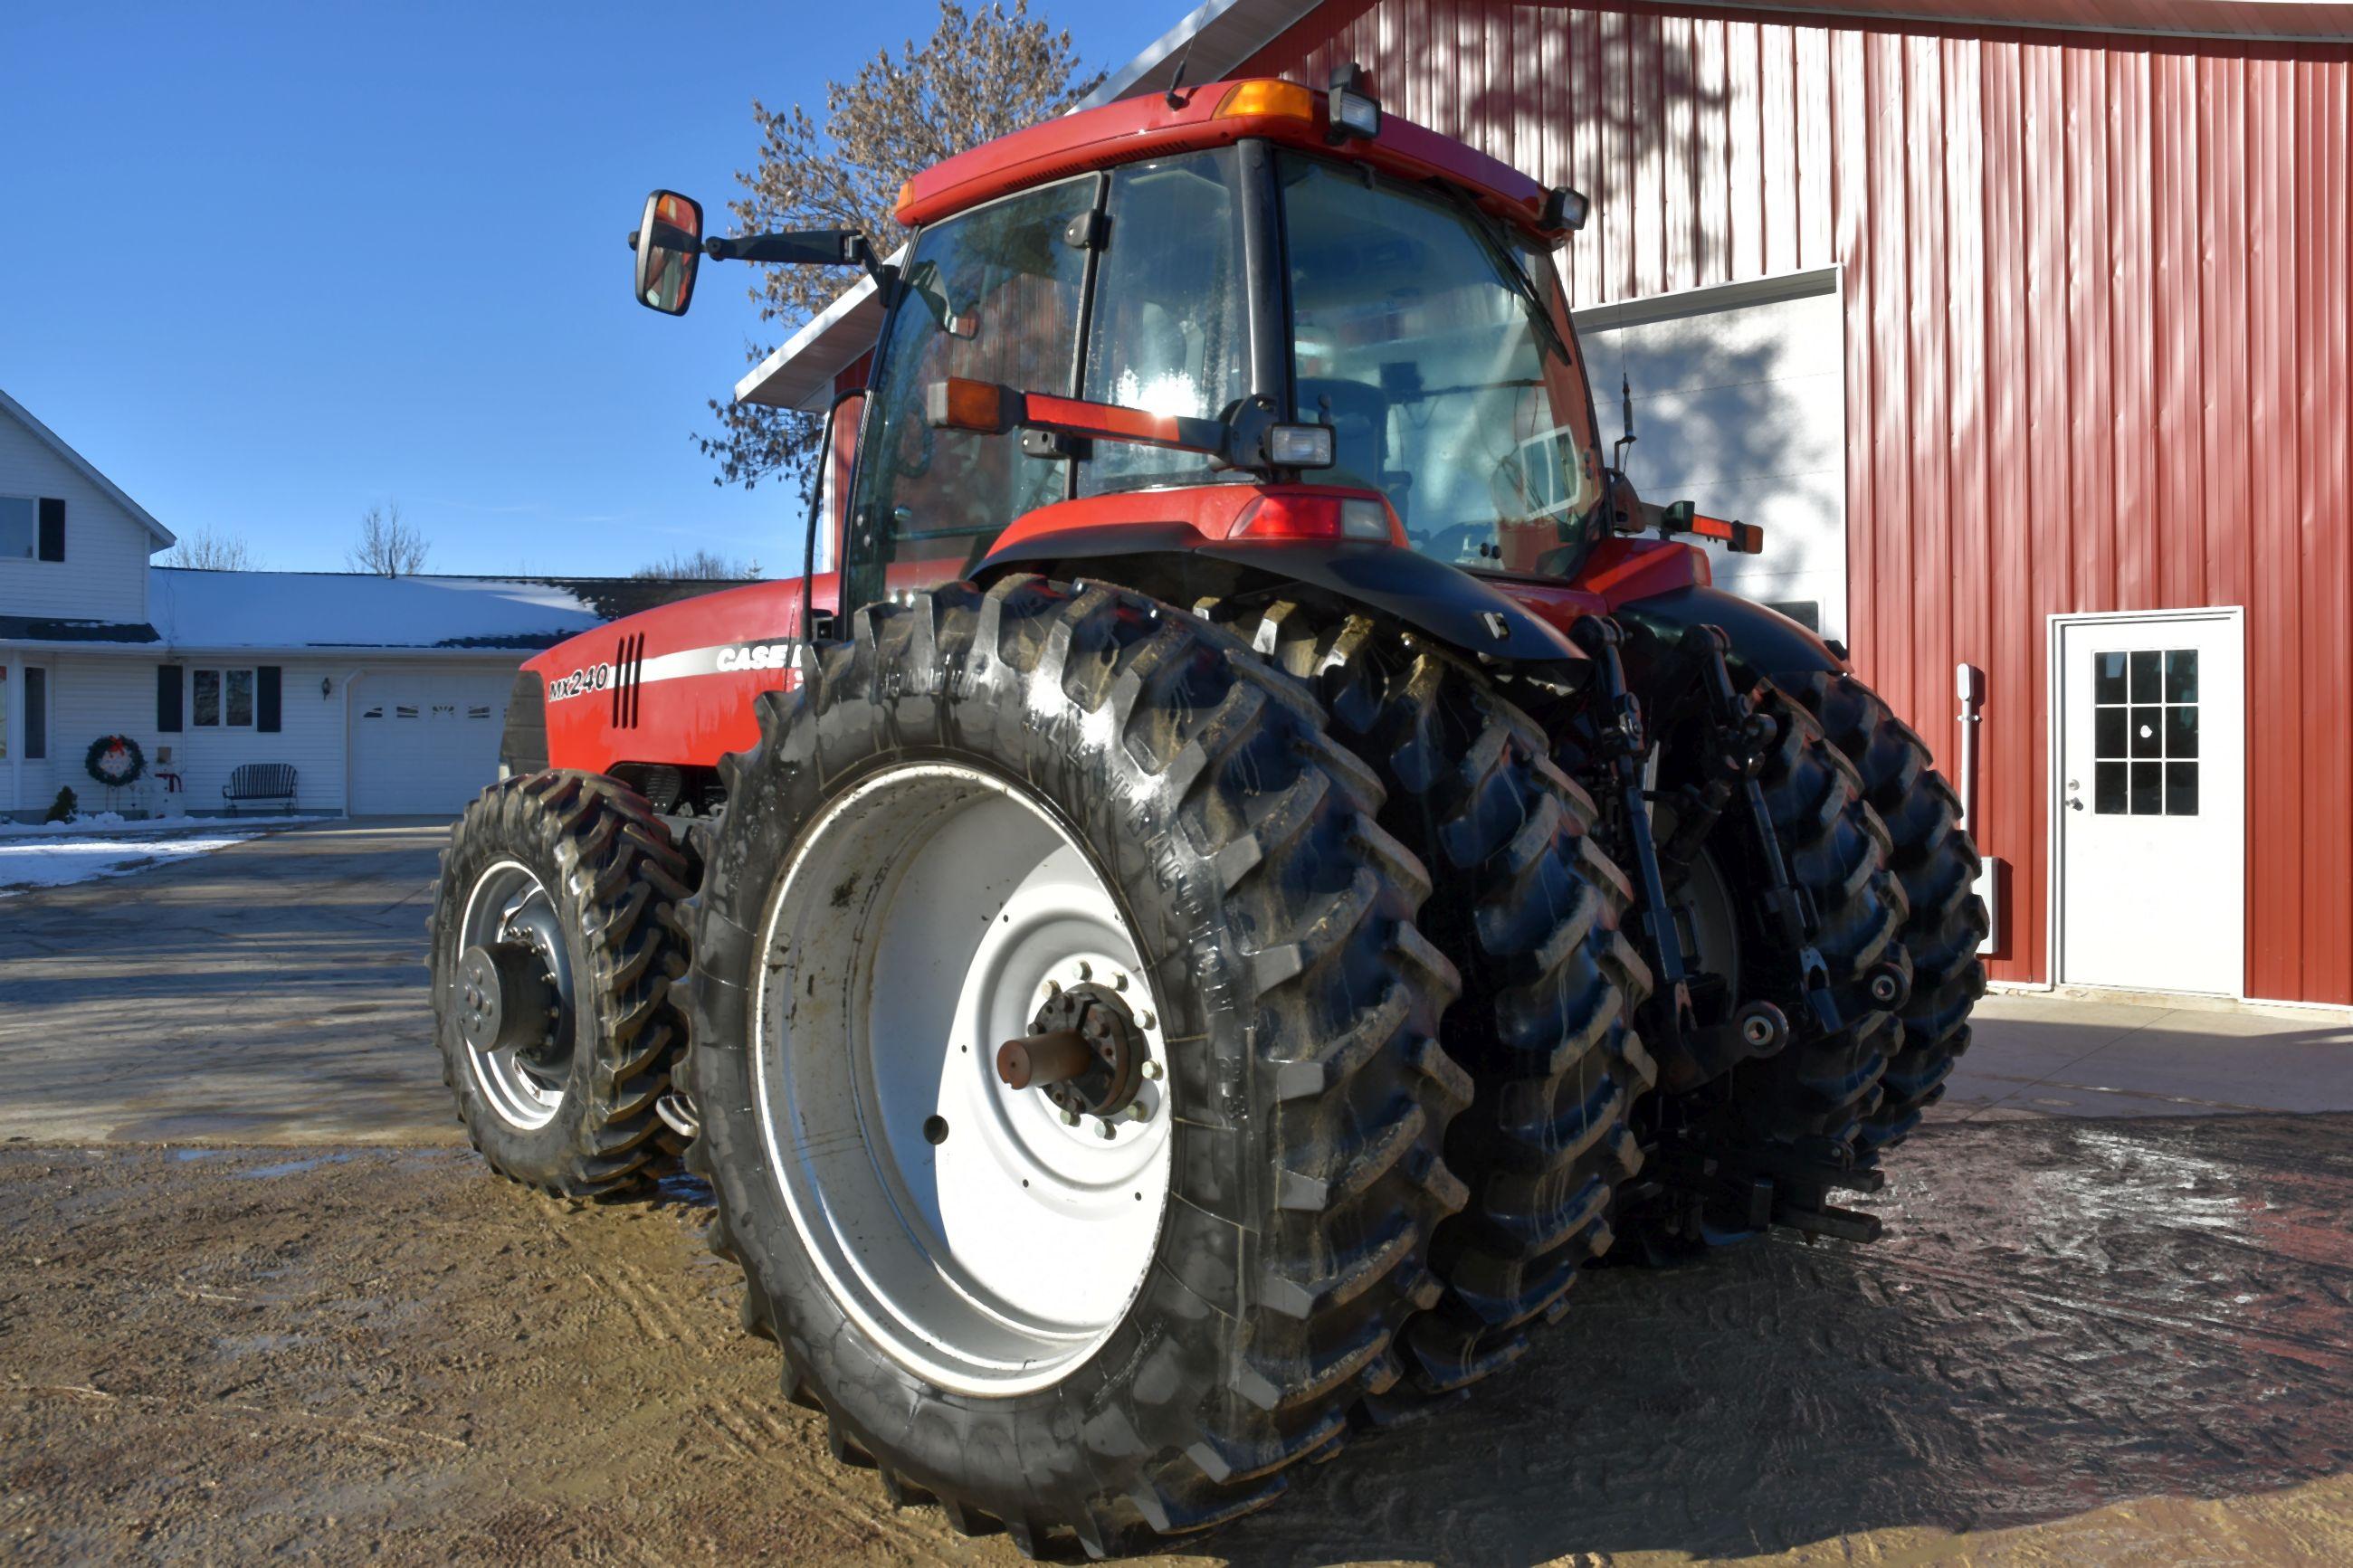 2001 Case IH MX240 Magnum MFWD, 3518 Hours, 480/80R46 Duals At 85%, 380/85R34 Fronts, 3 Hydraulics,